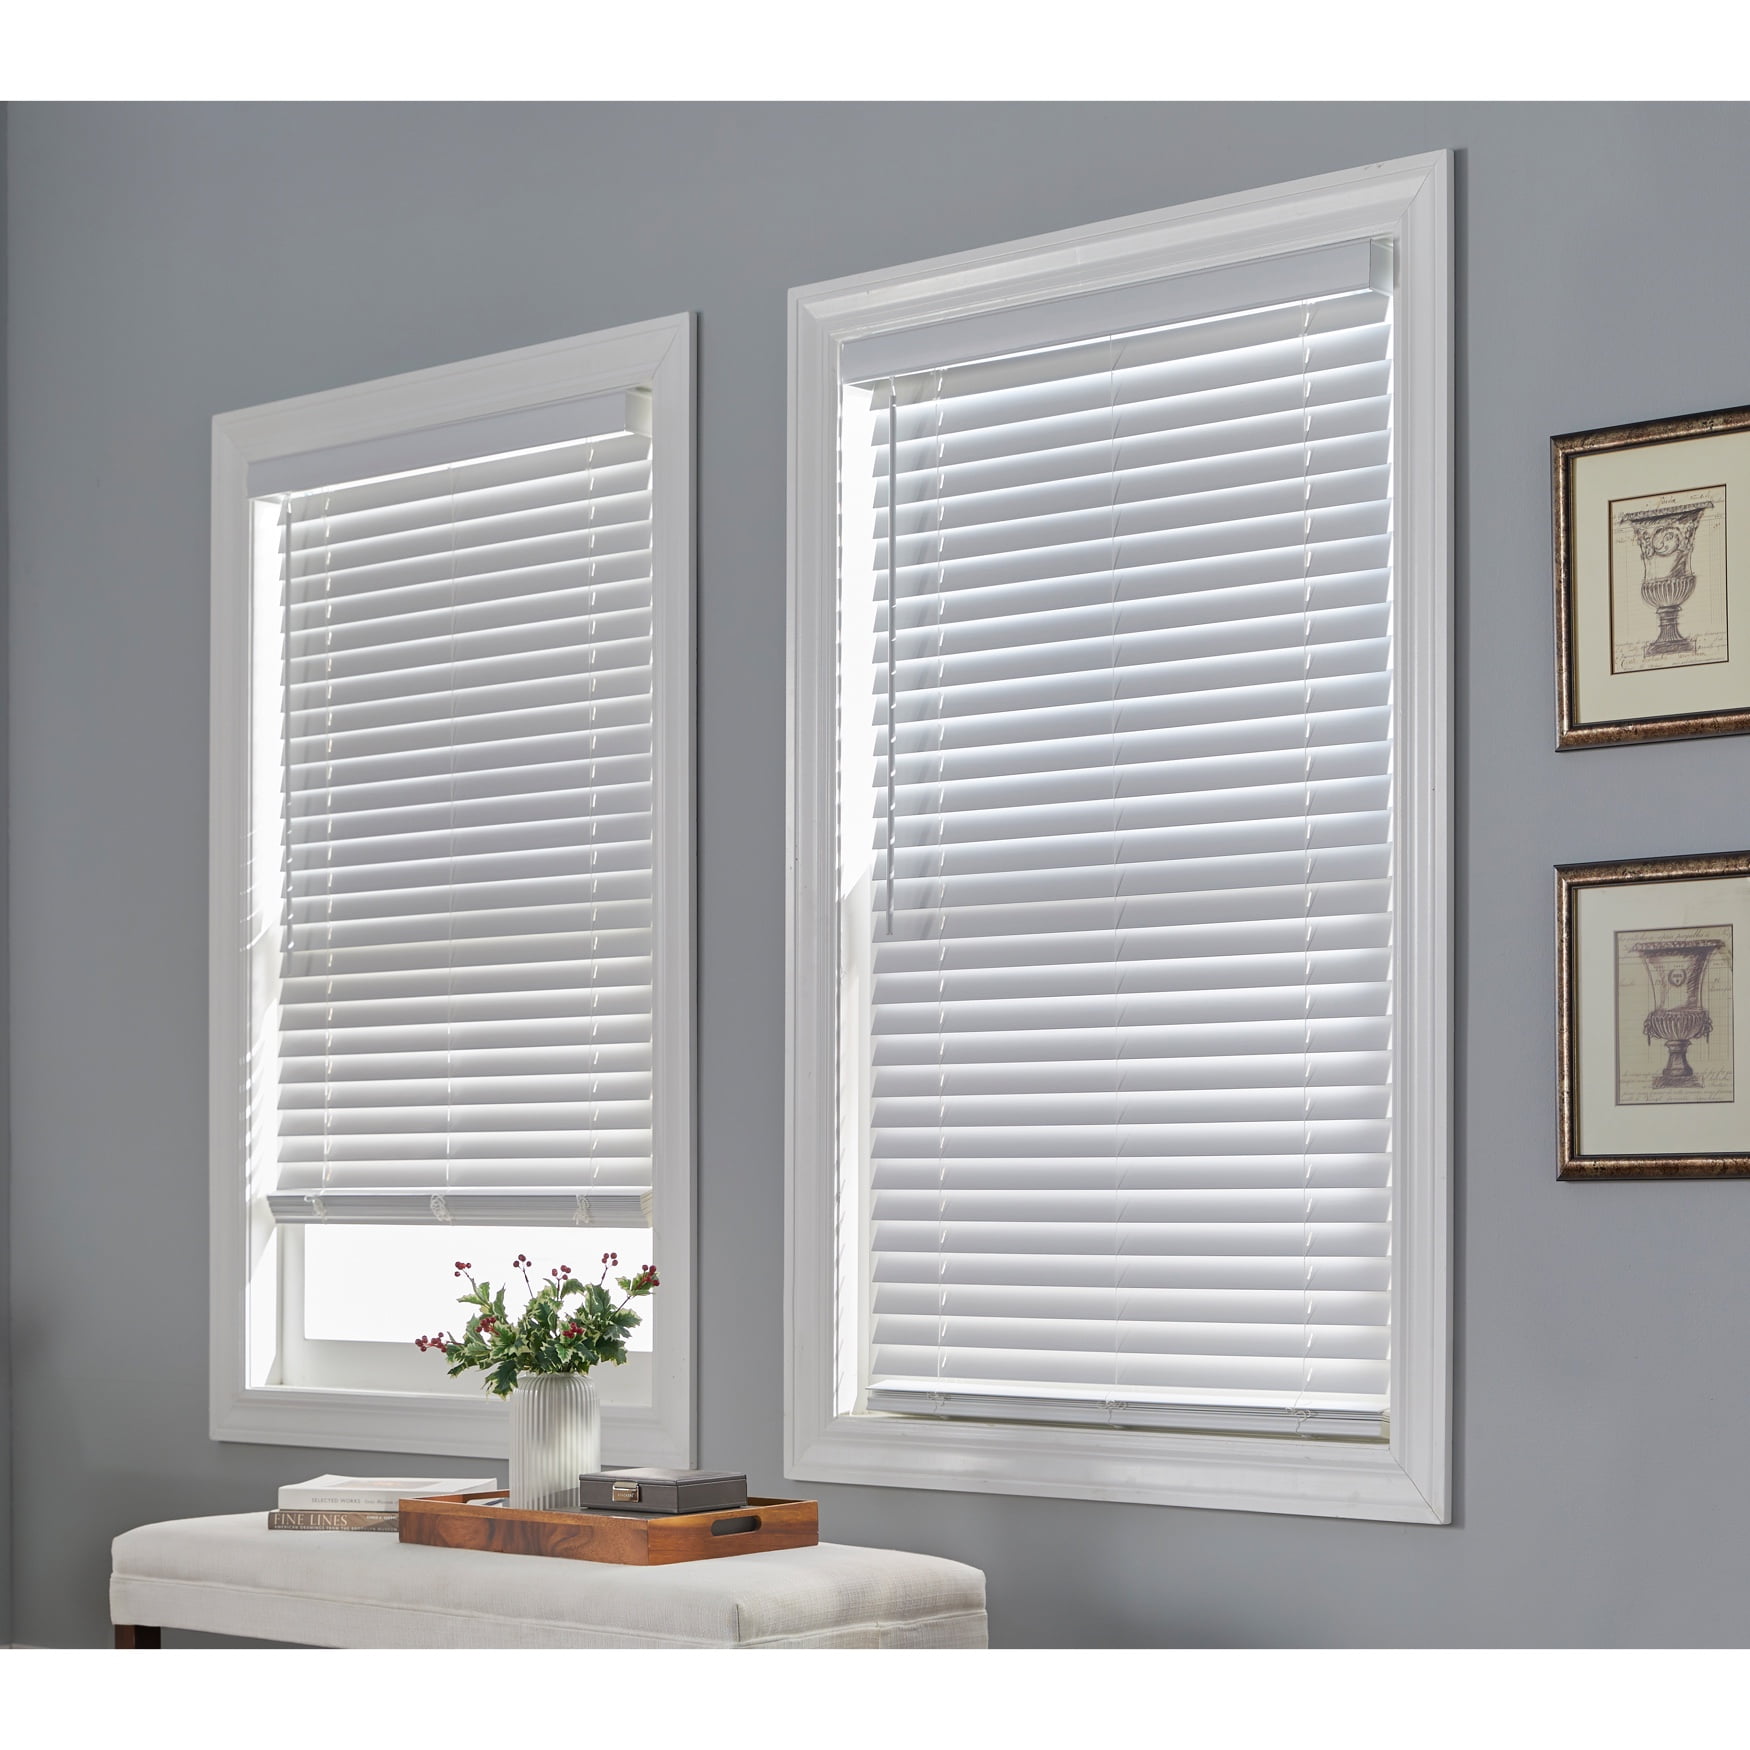 BrylaneHome 2" Faux Wood Cordless Blinds Window Privacy Shades